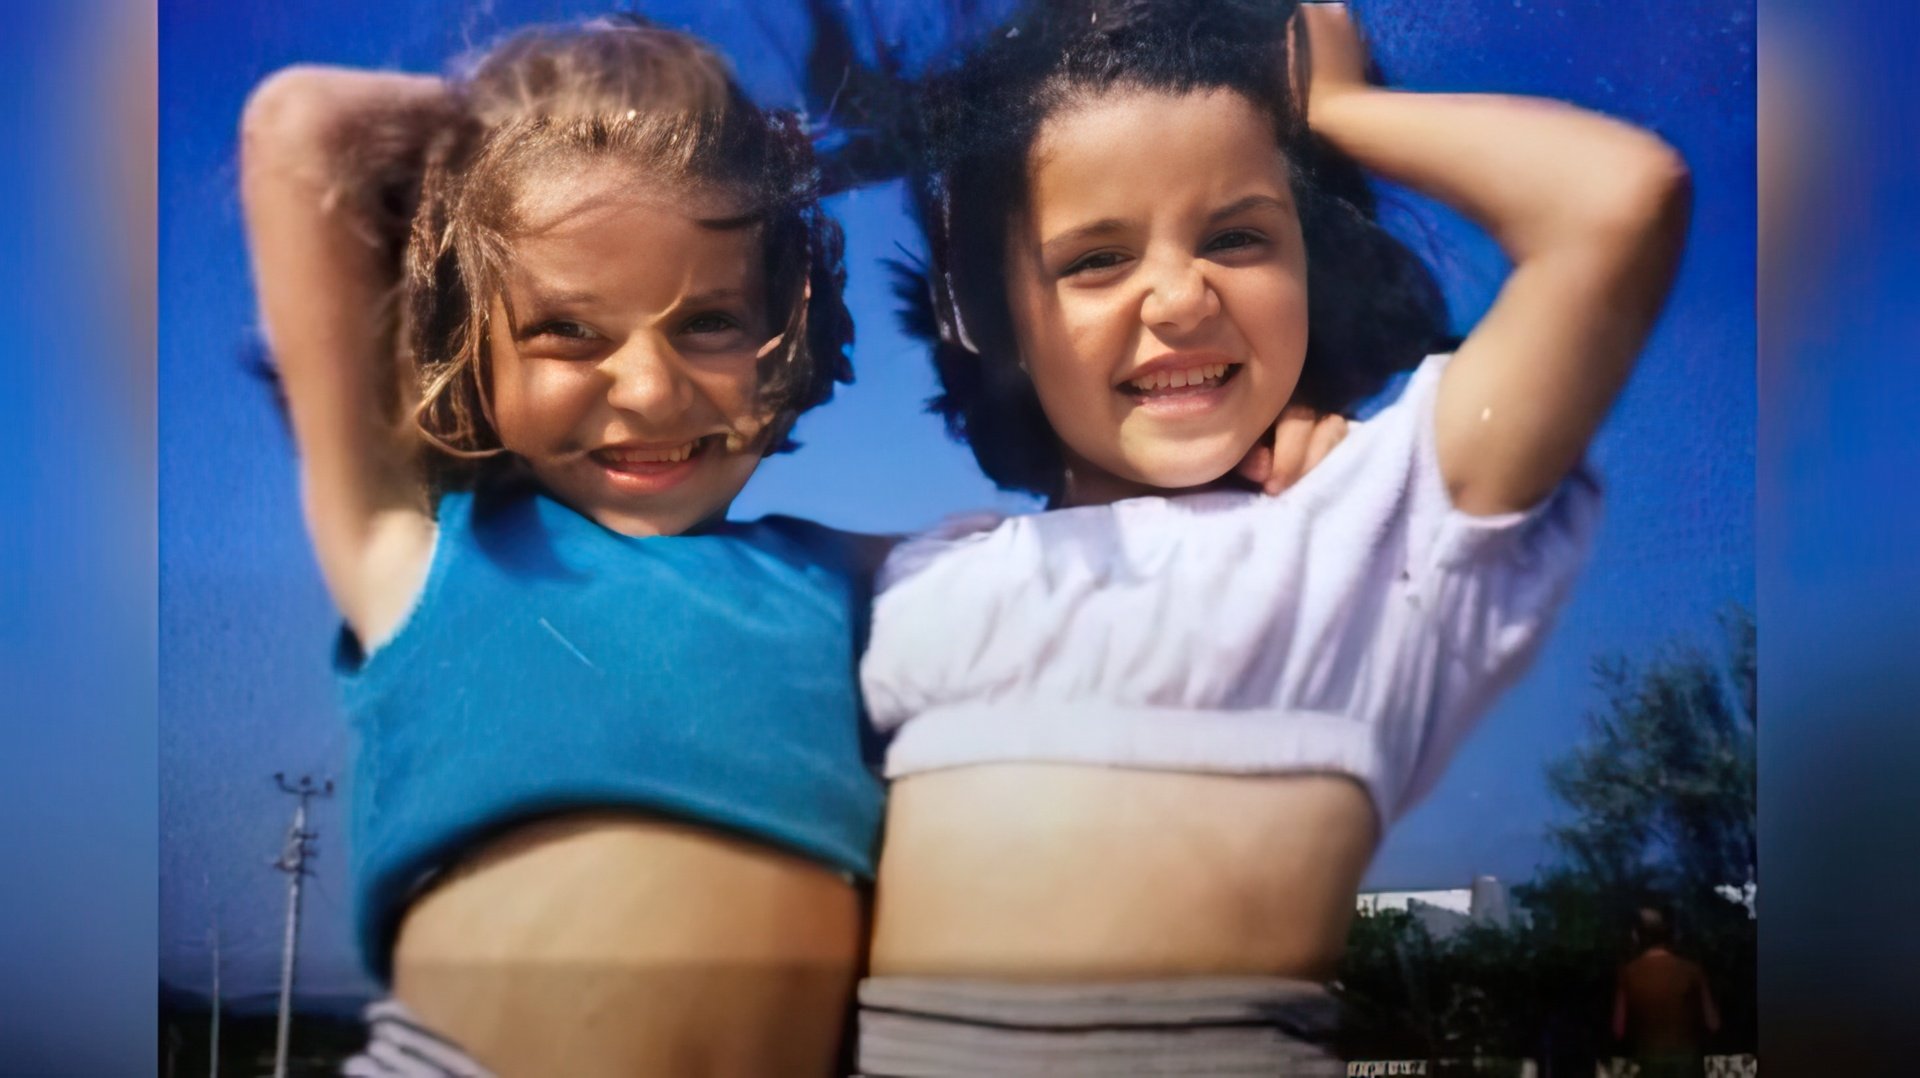 Hande Erçel with her sister in childhood (right)